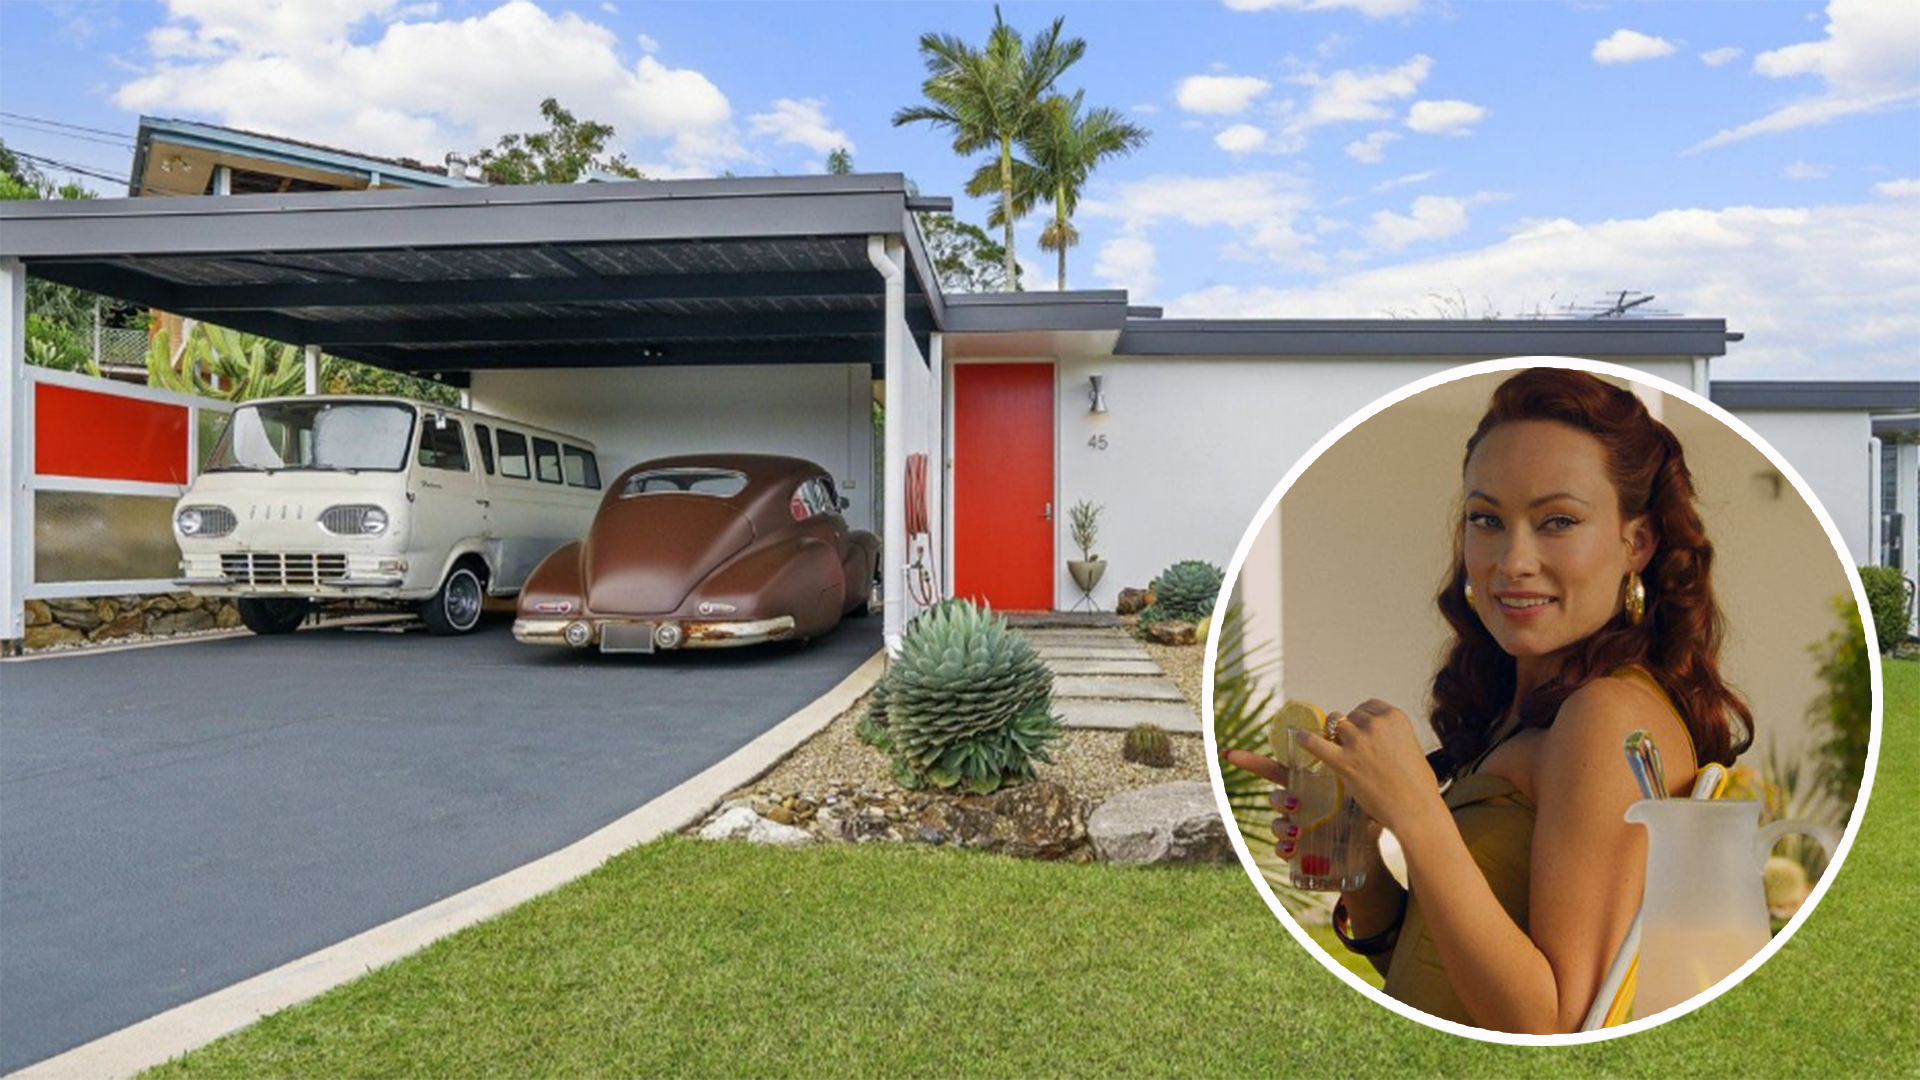 Brisbane's own 'Don't Worry Darling' hits the market